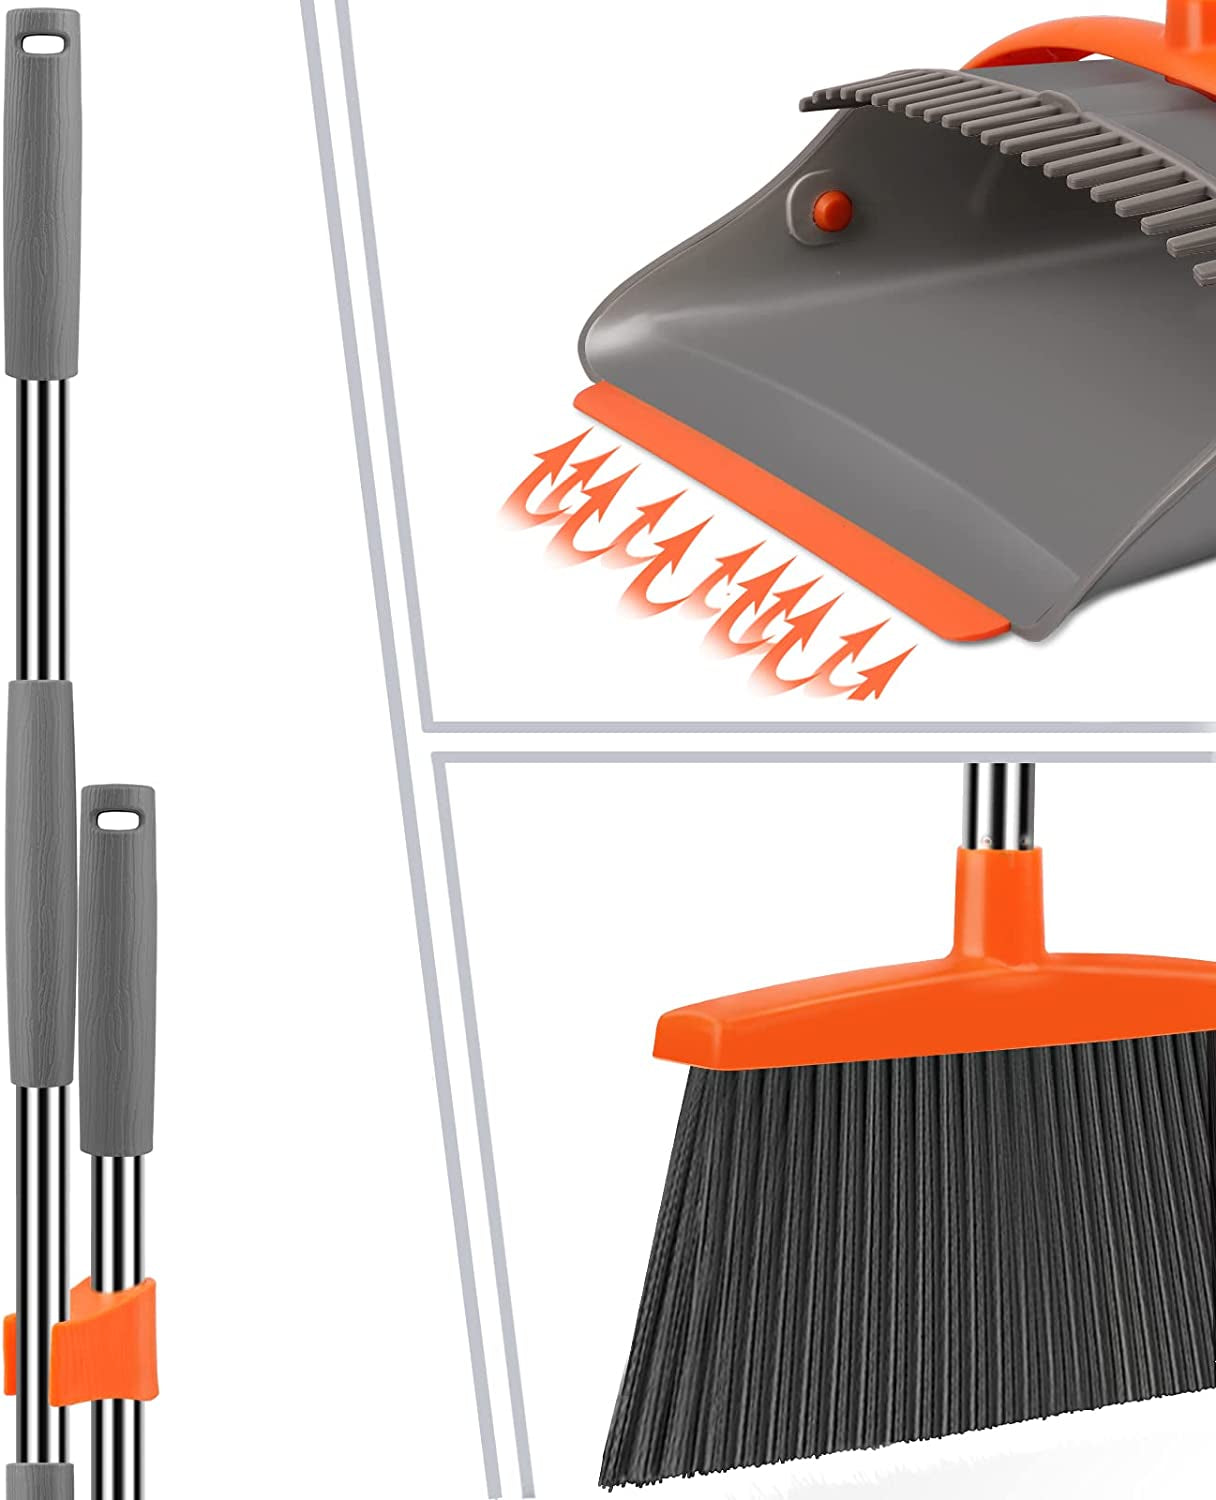 Broom and Dustpan Set for Home, Broom and Dustpan Combo for Office, Long Handle Broom with Upright Standing Dustpan,Indoor&Outdoor Sweeping (Gray&Orange)